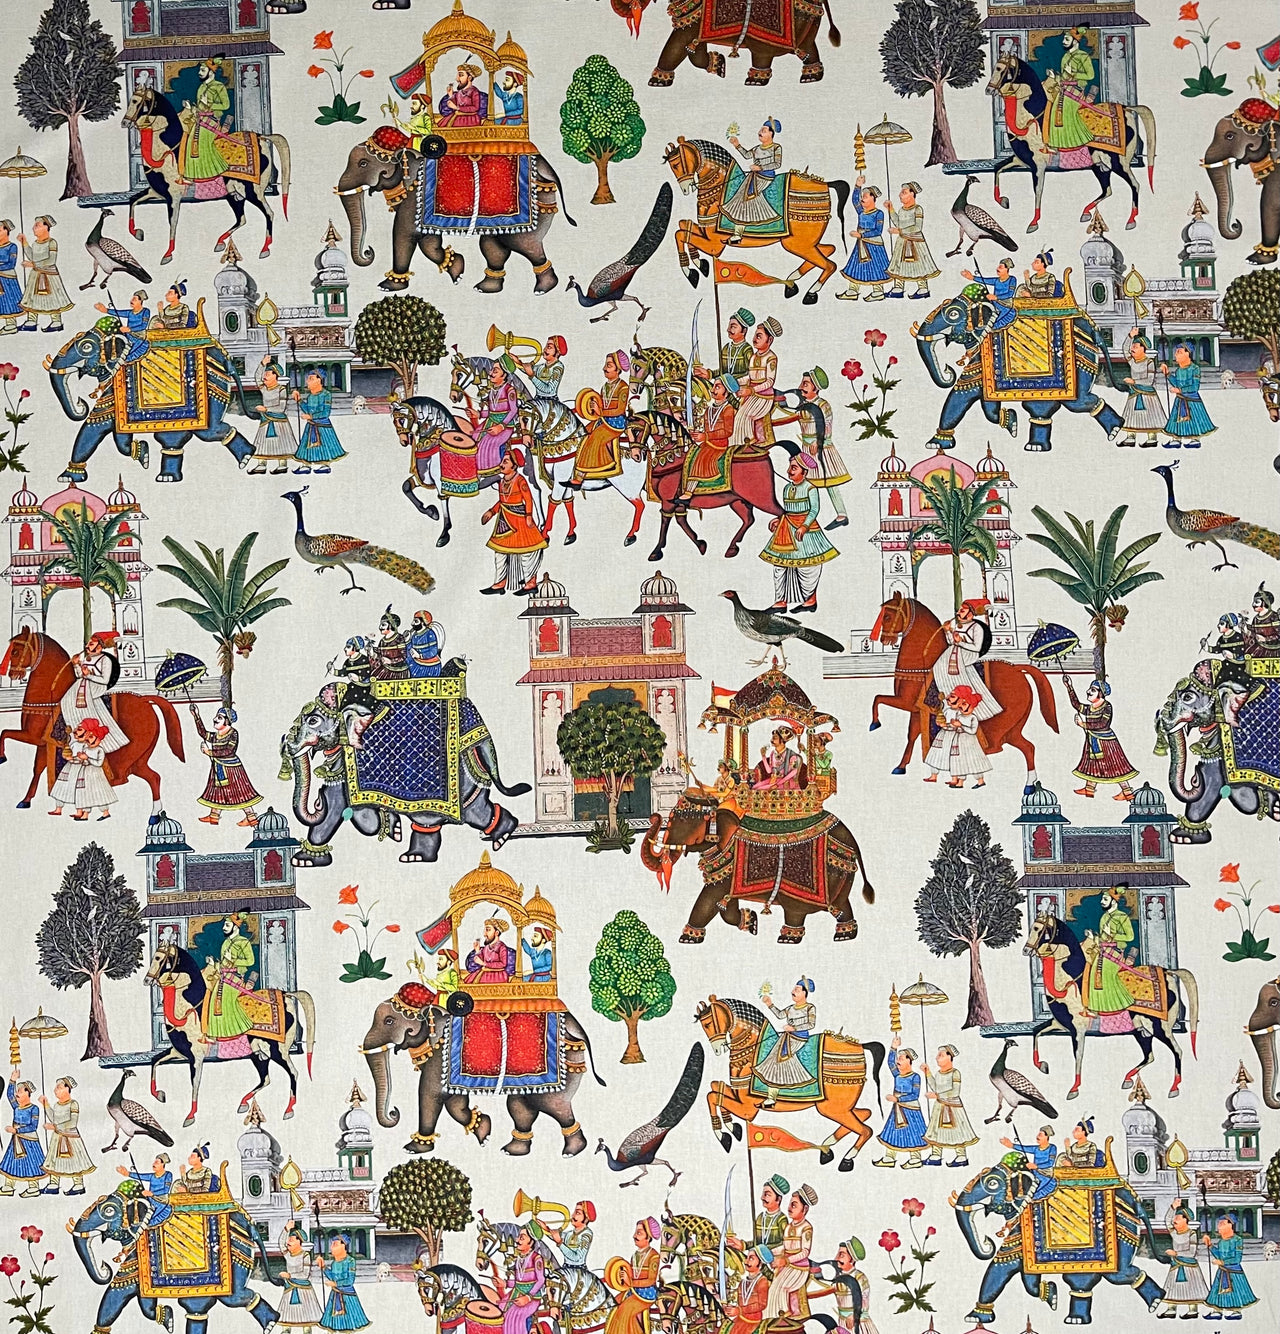 Custom - Made to Measure Roman Blinds - Jaipur Pattern with Off-White Cotton Fabric featuring Elephants, Palm Trees, Birds, and Animals